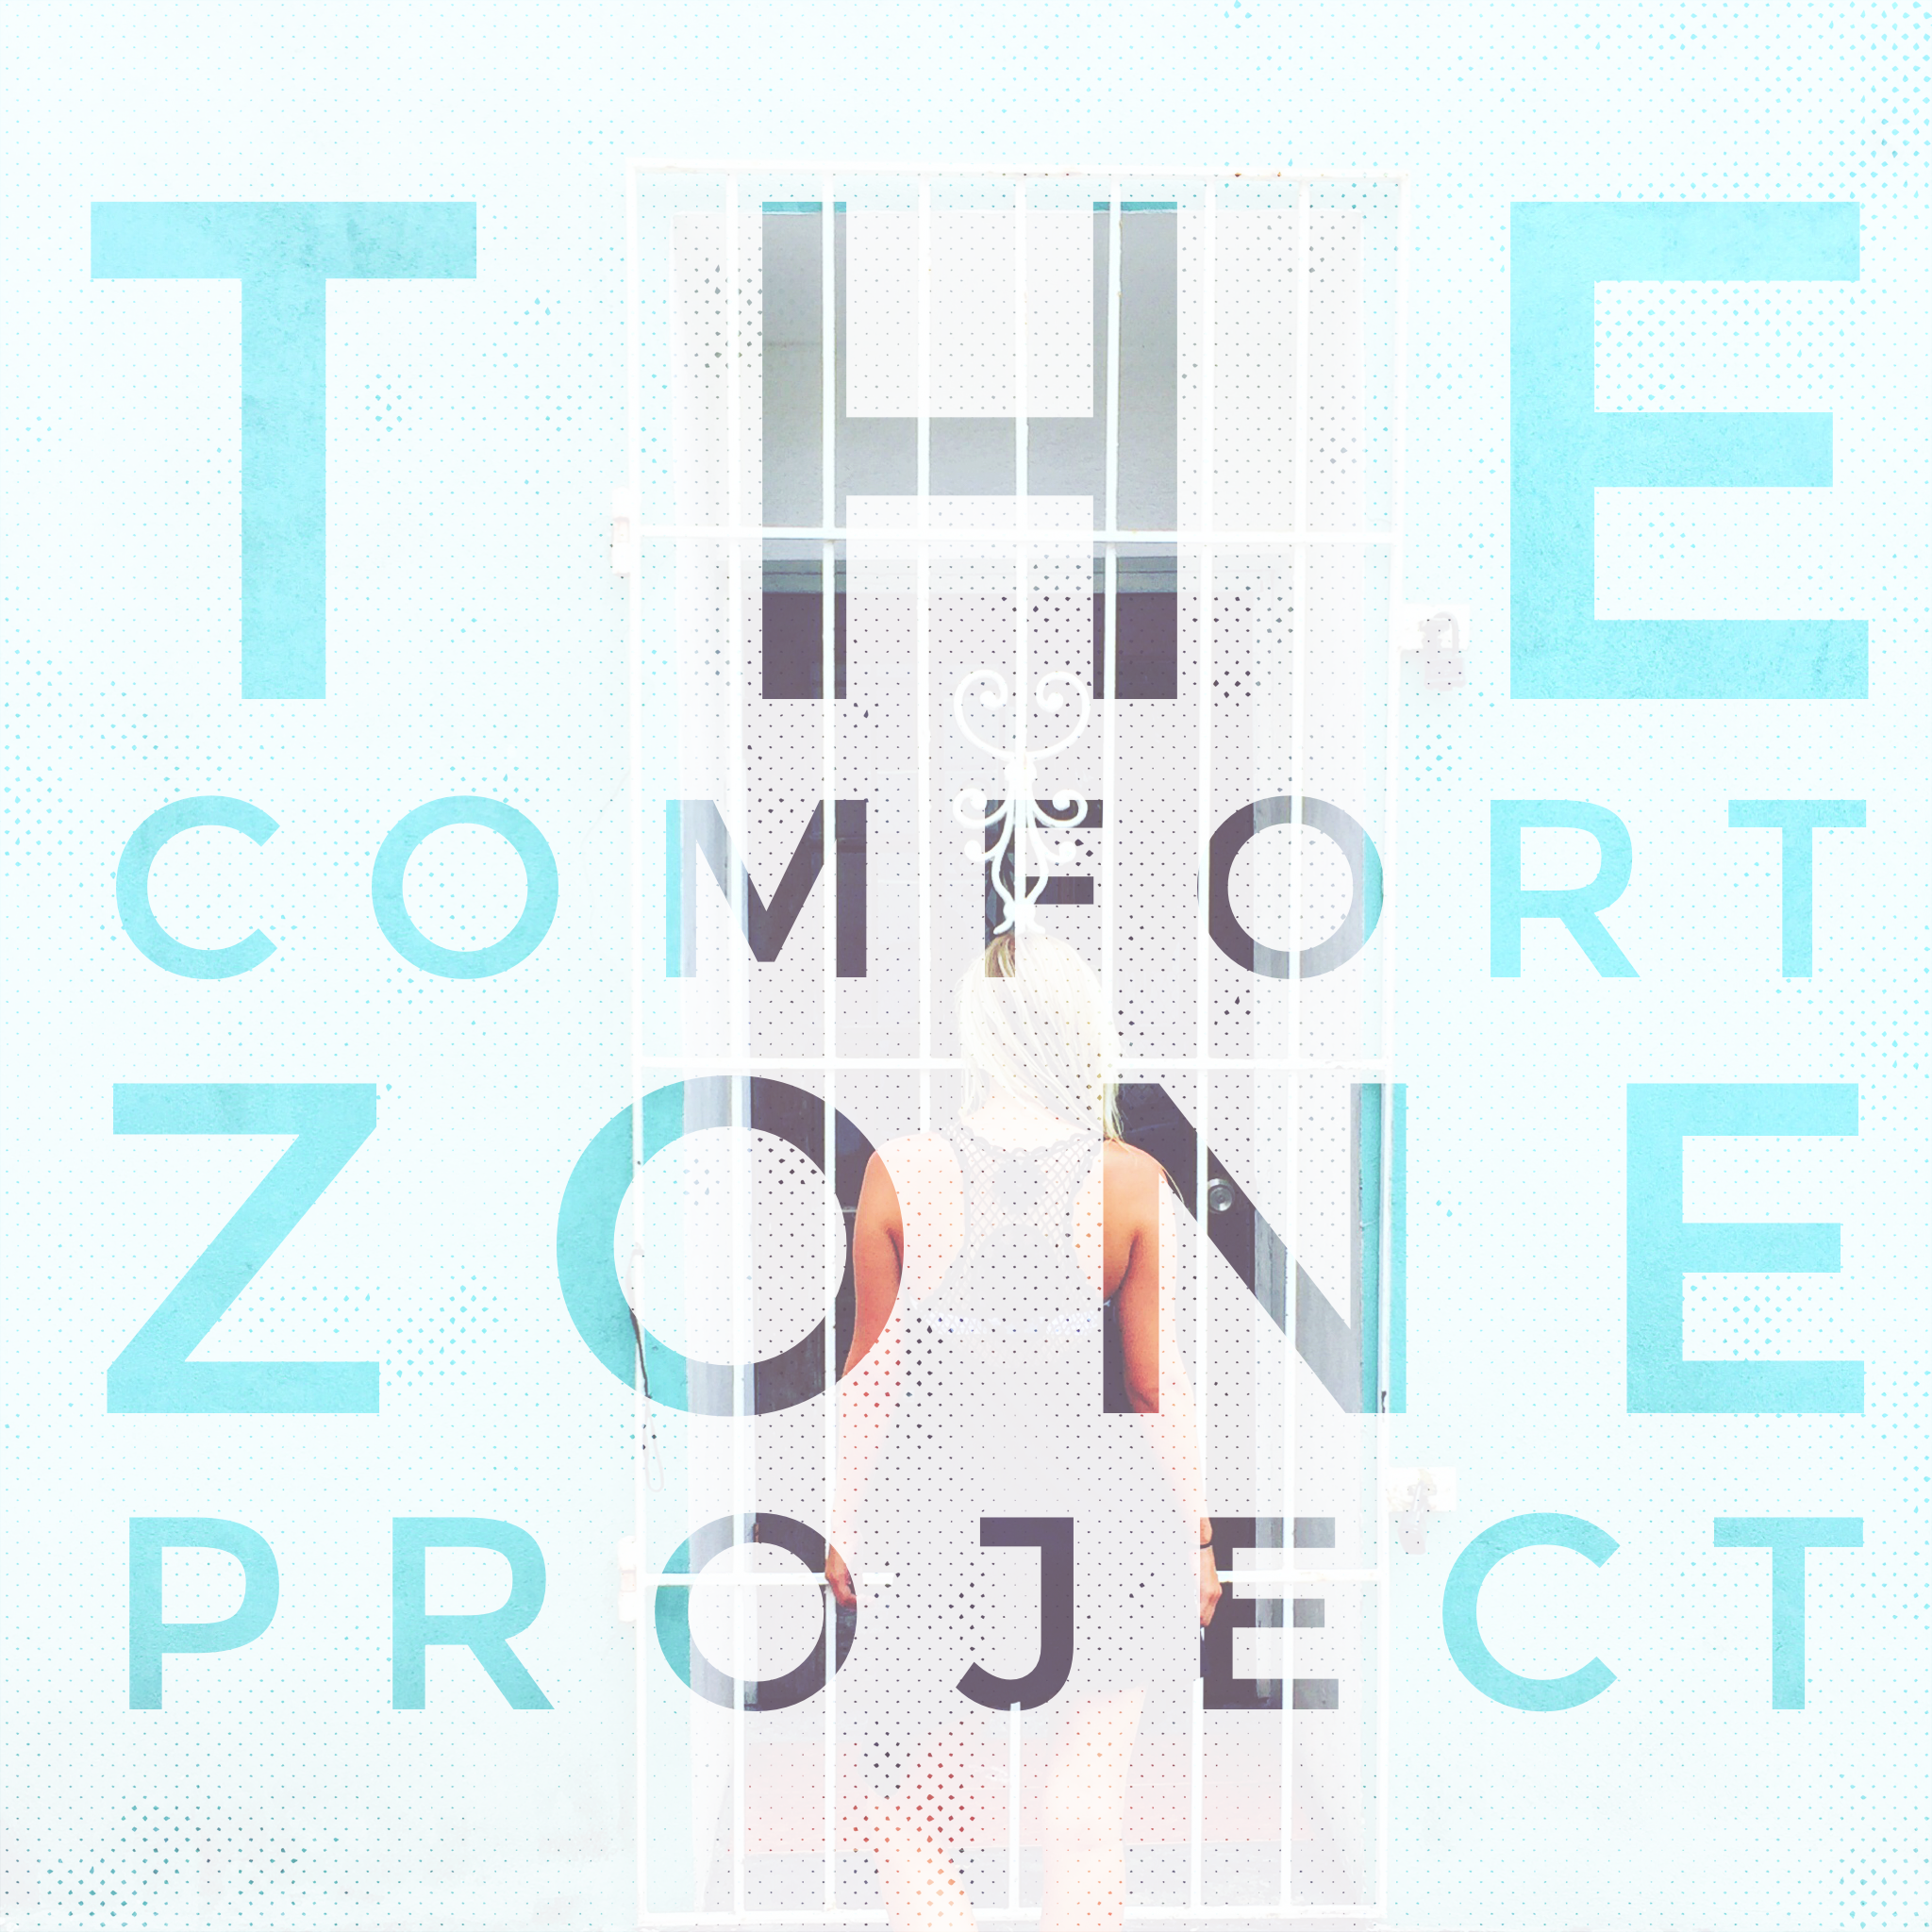 Welcome to the Comfort Zone Project!